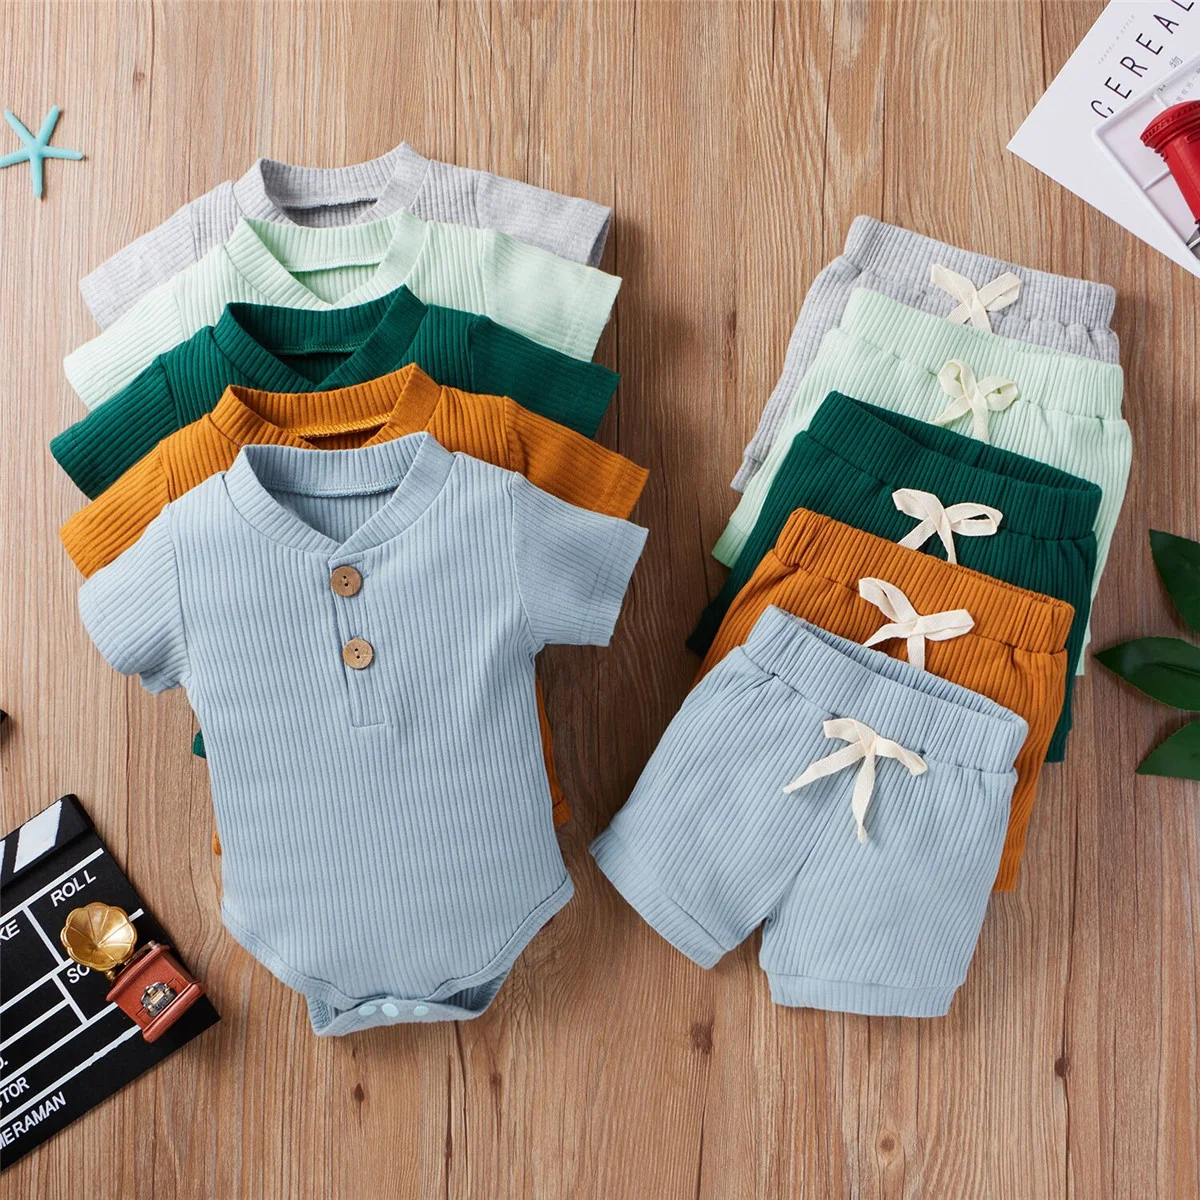 

Summer Newborn Infant Toddler Clothes Boy Girl Outfits Cotton Ribbed Romper Shorts Baby Clothing Sets, Photo showed and customized color